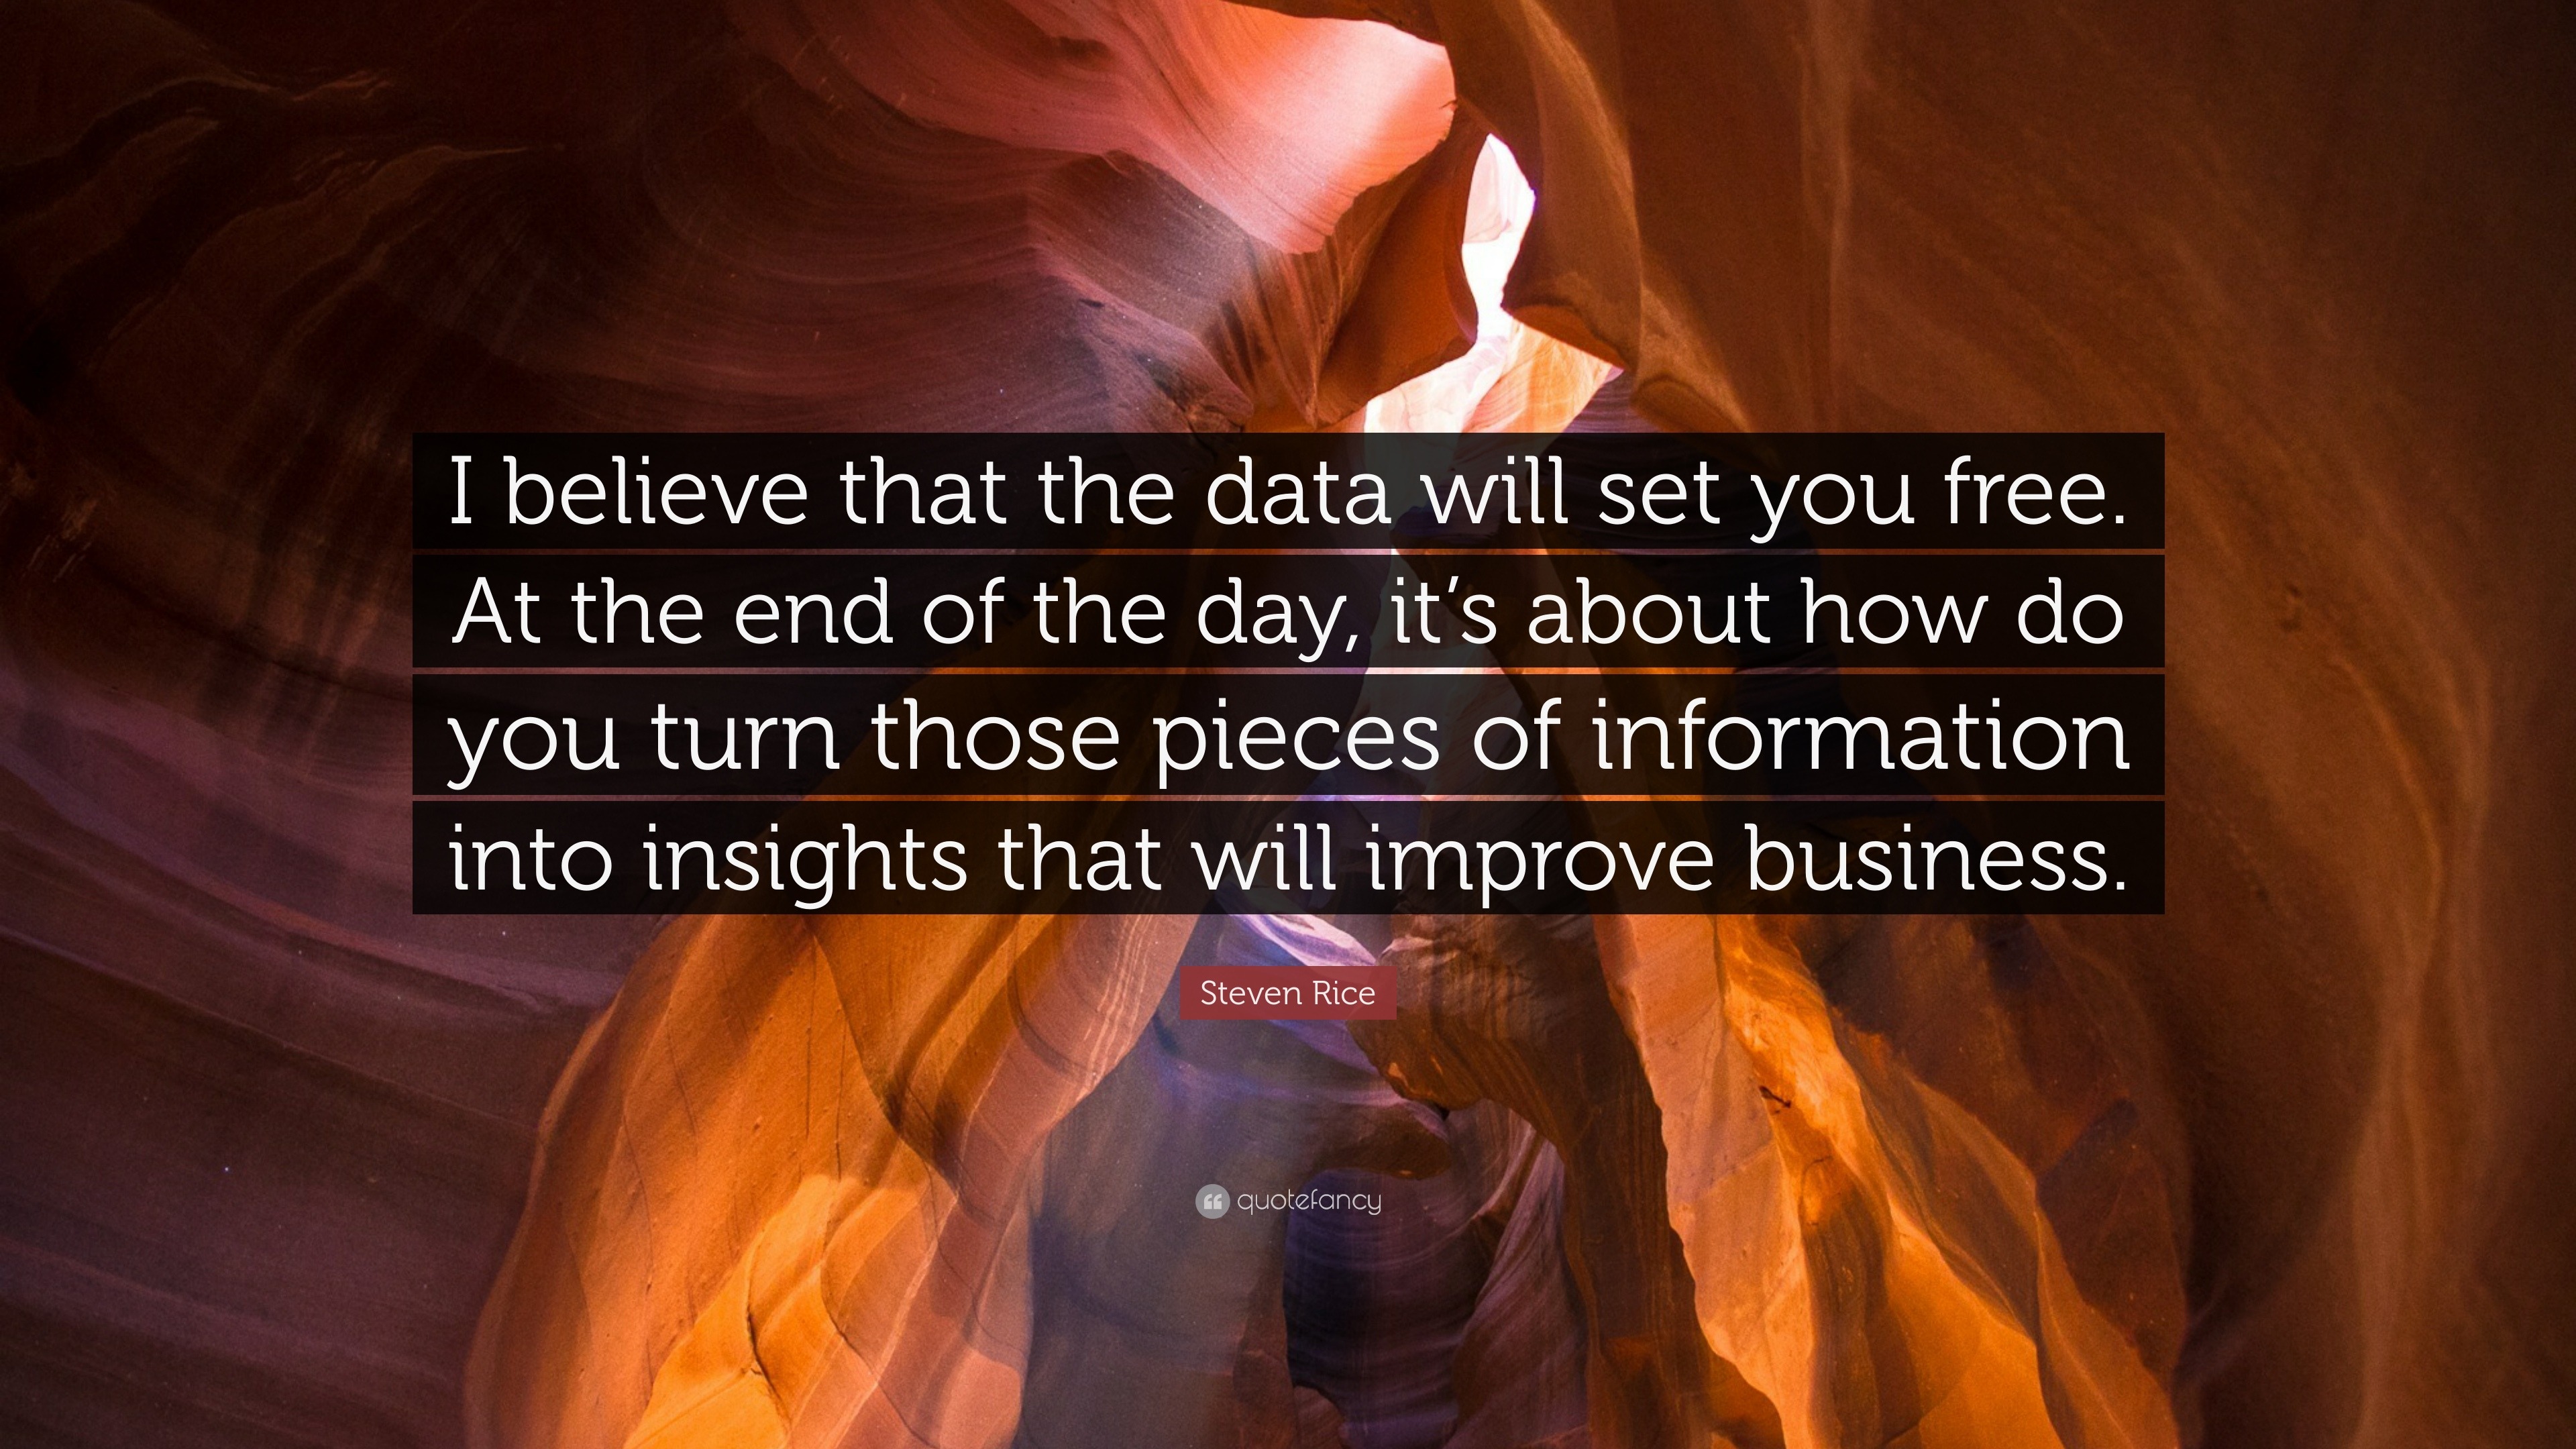 Steven Rice Quote “I believe that the data will set you free At